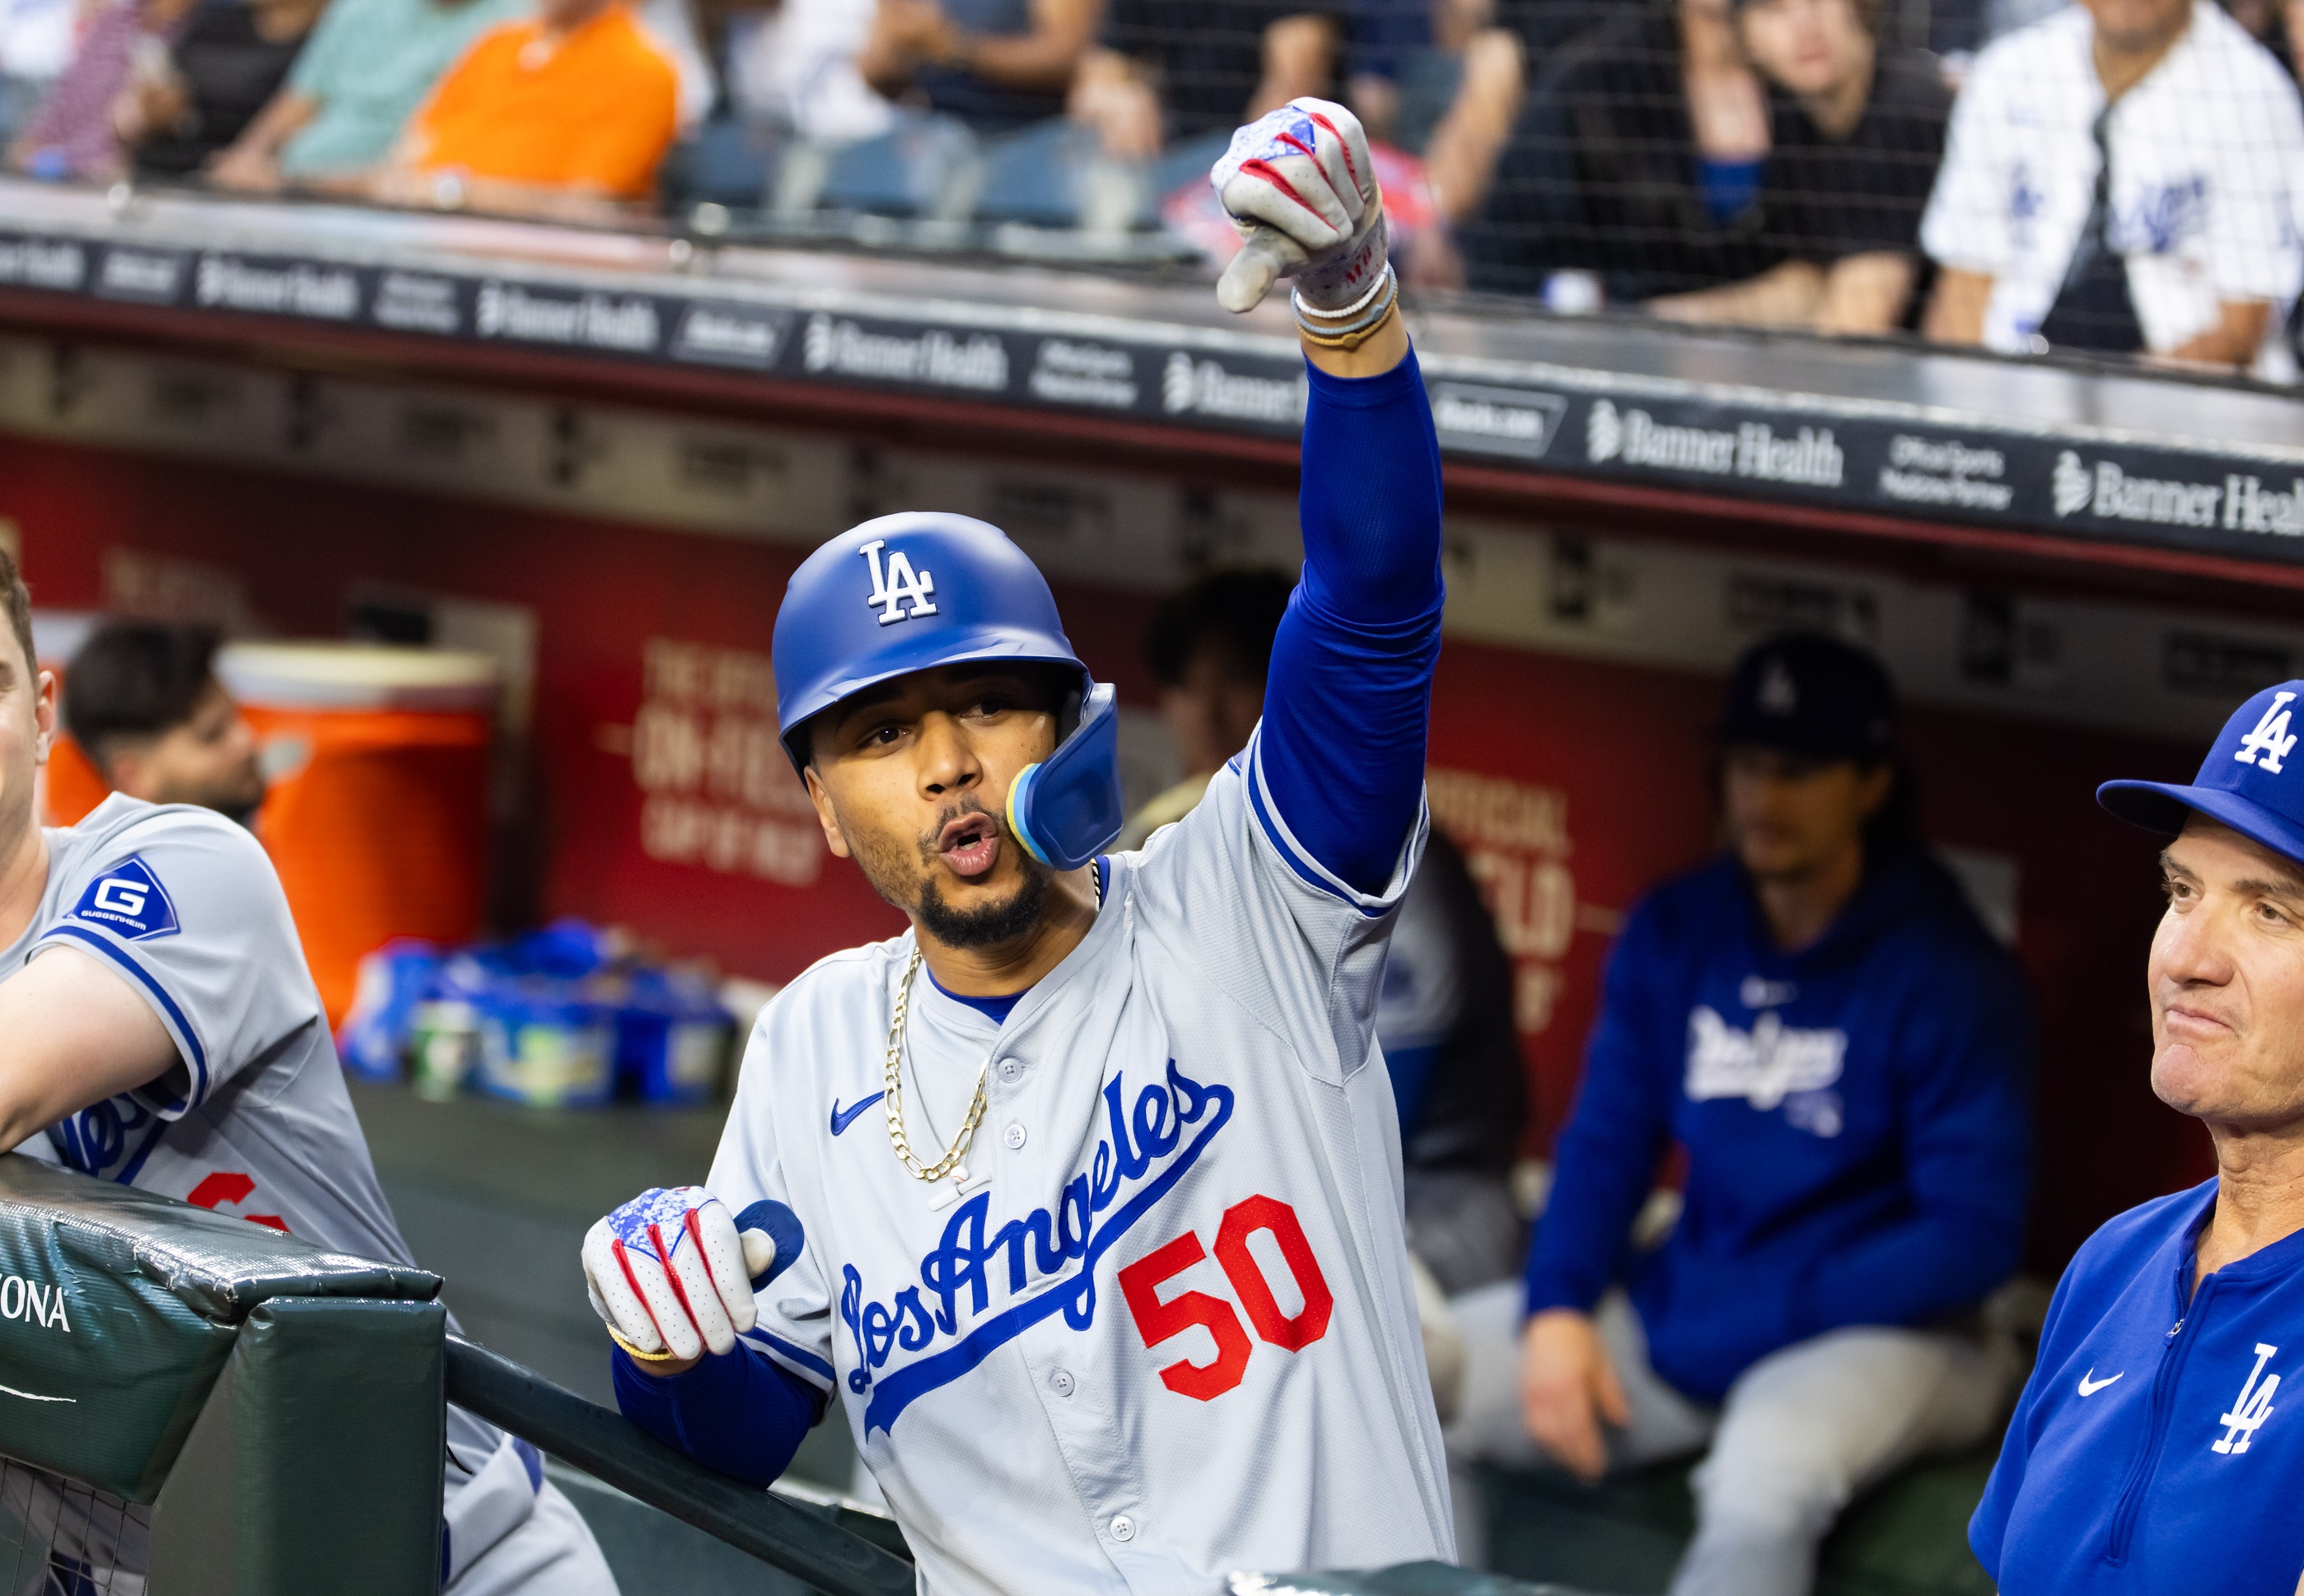 Expert MLB handicapping roundup Mookie Betts Los Angeles Dodgers